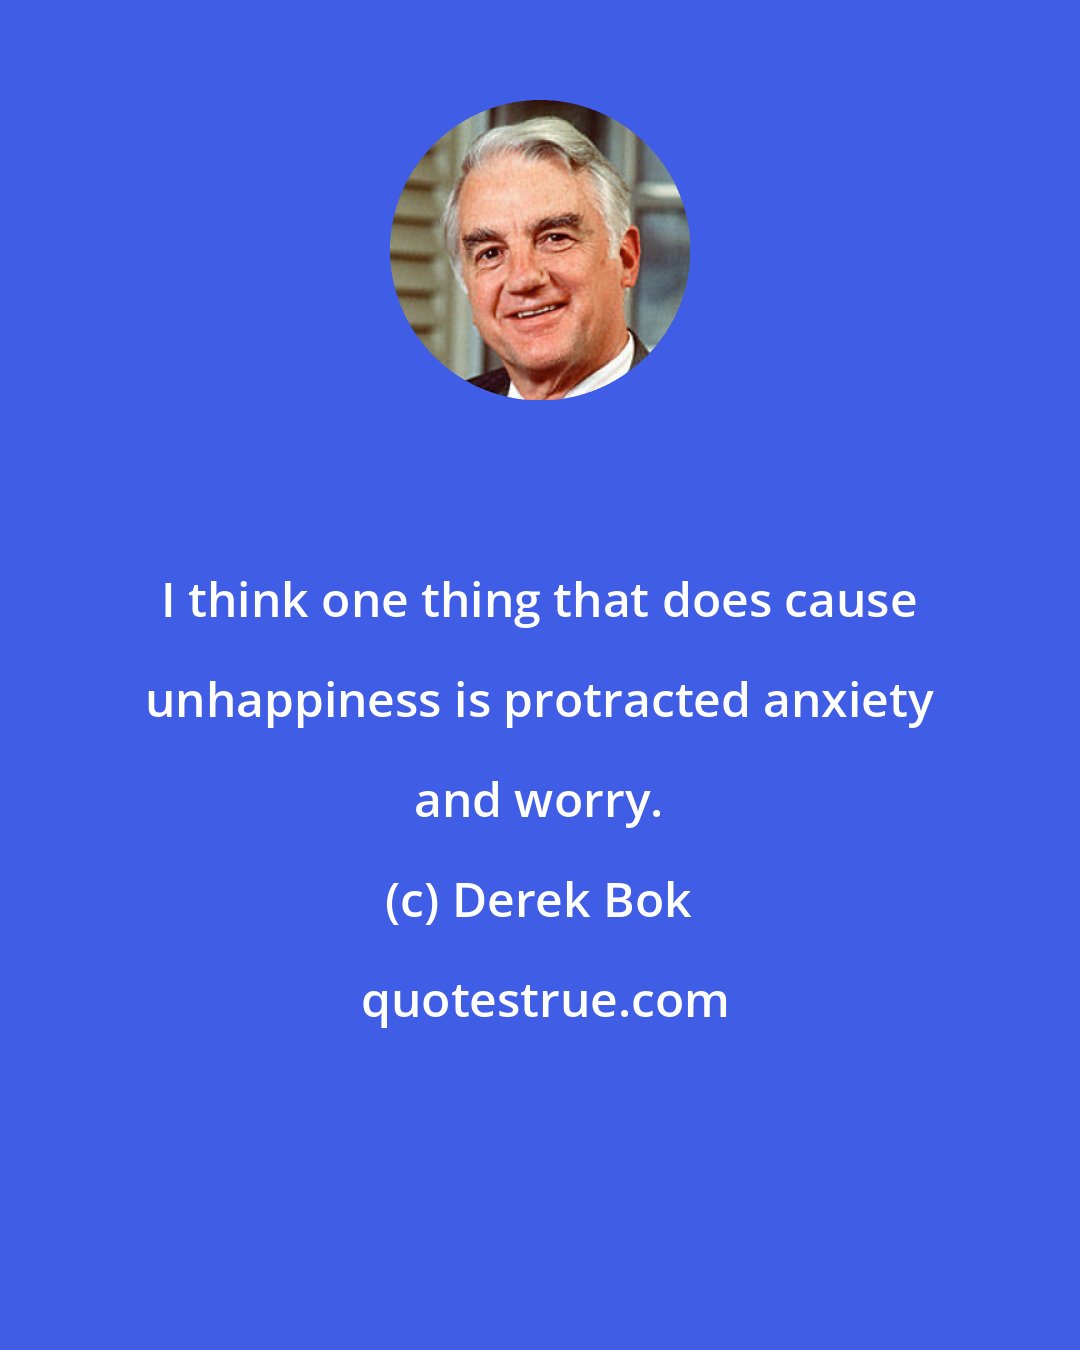 Derek Bok: I think one thing that does cause unhappiness is protracted anxiety and worry.